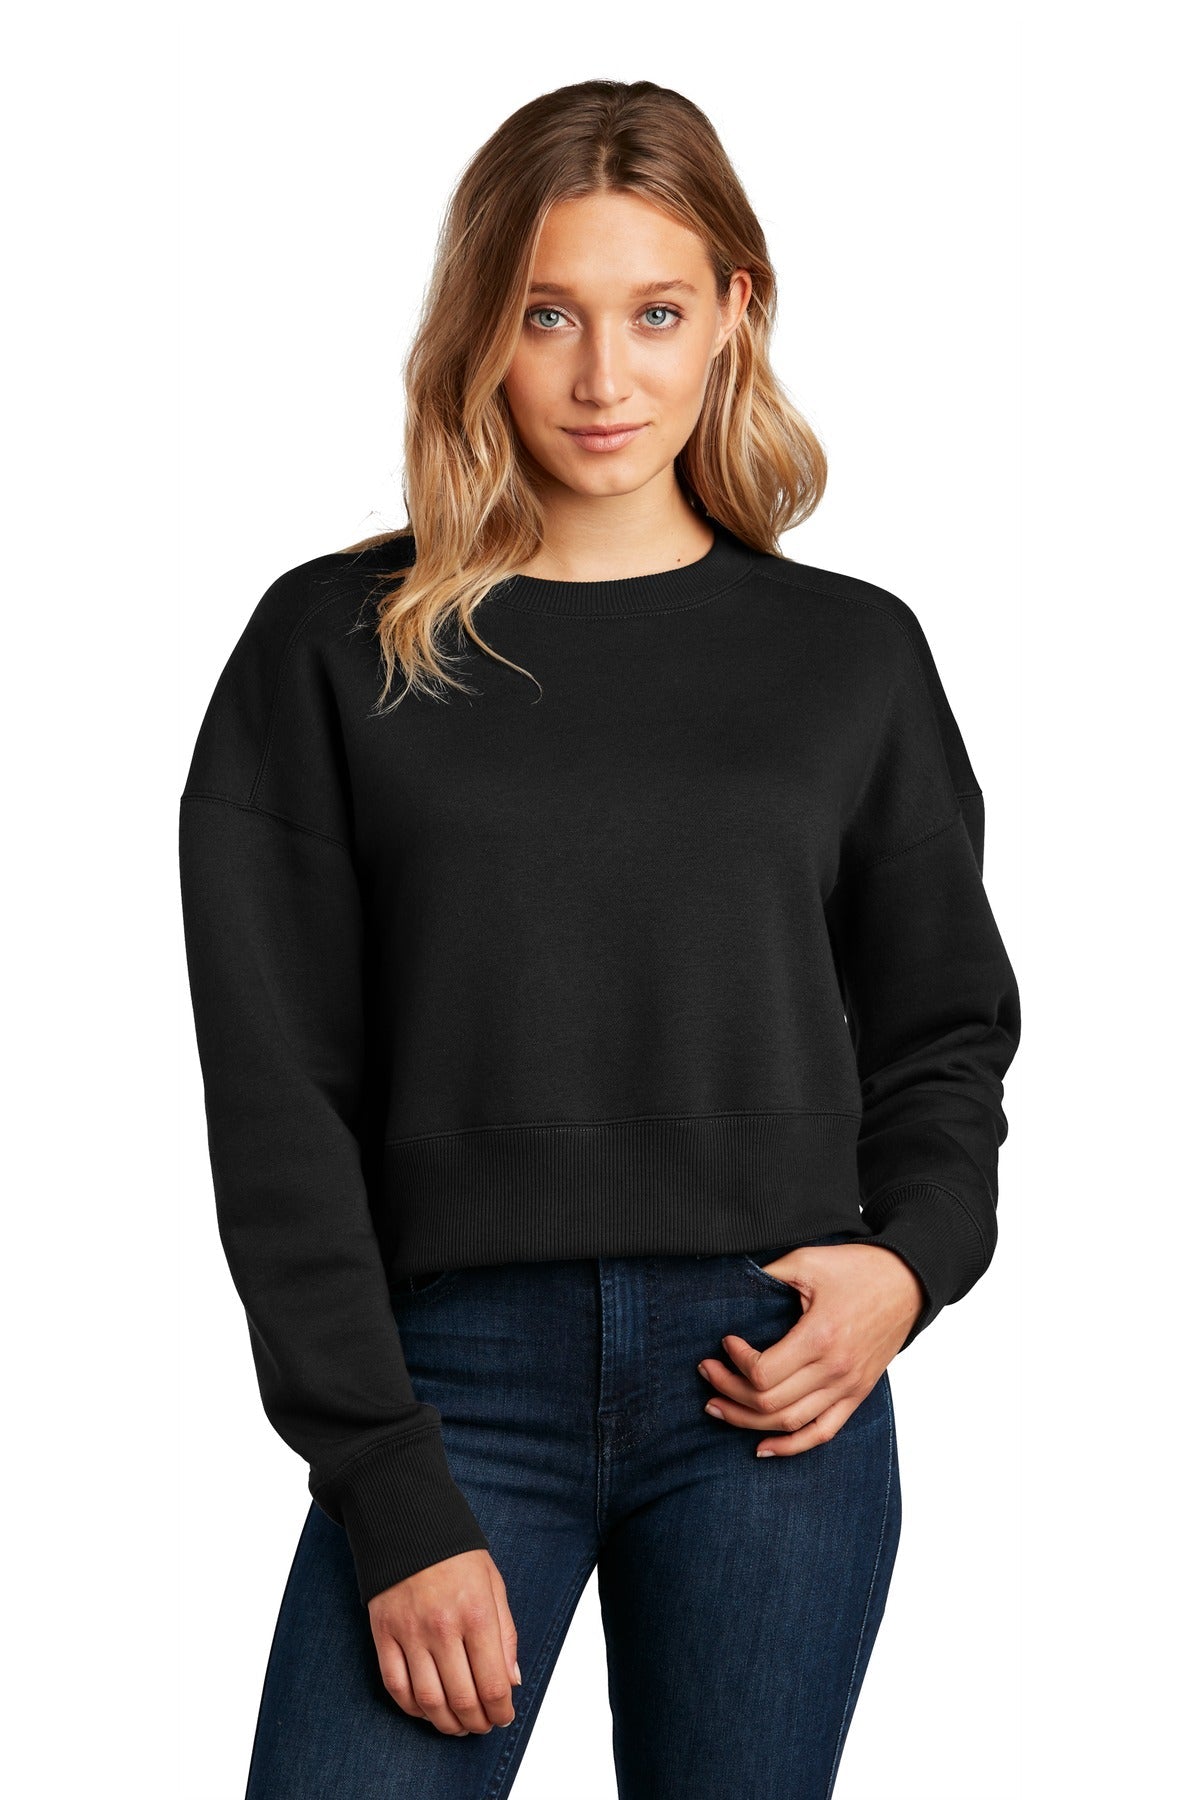 District ® Women's Perfect Weight ® Fleece Cropped Crew DT1105 - DFW Impression